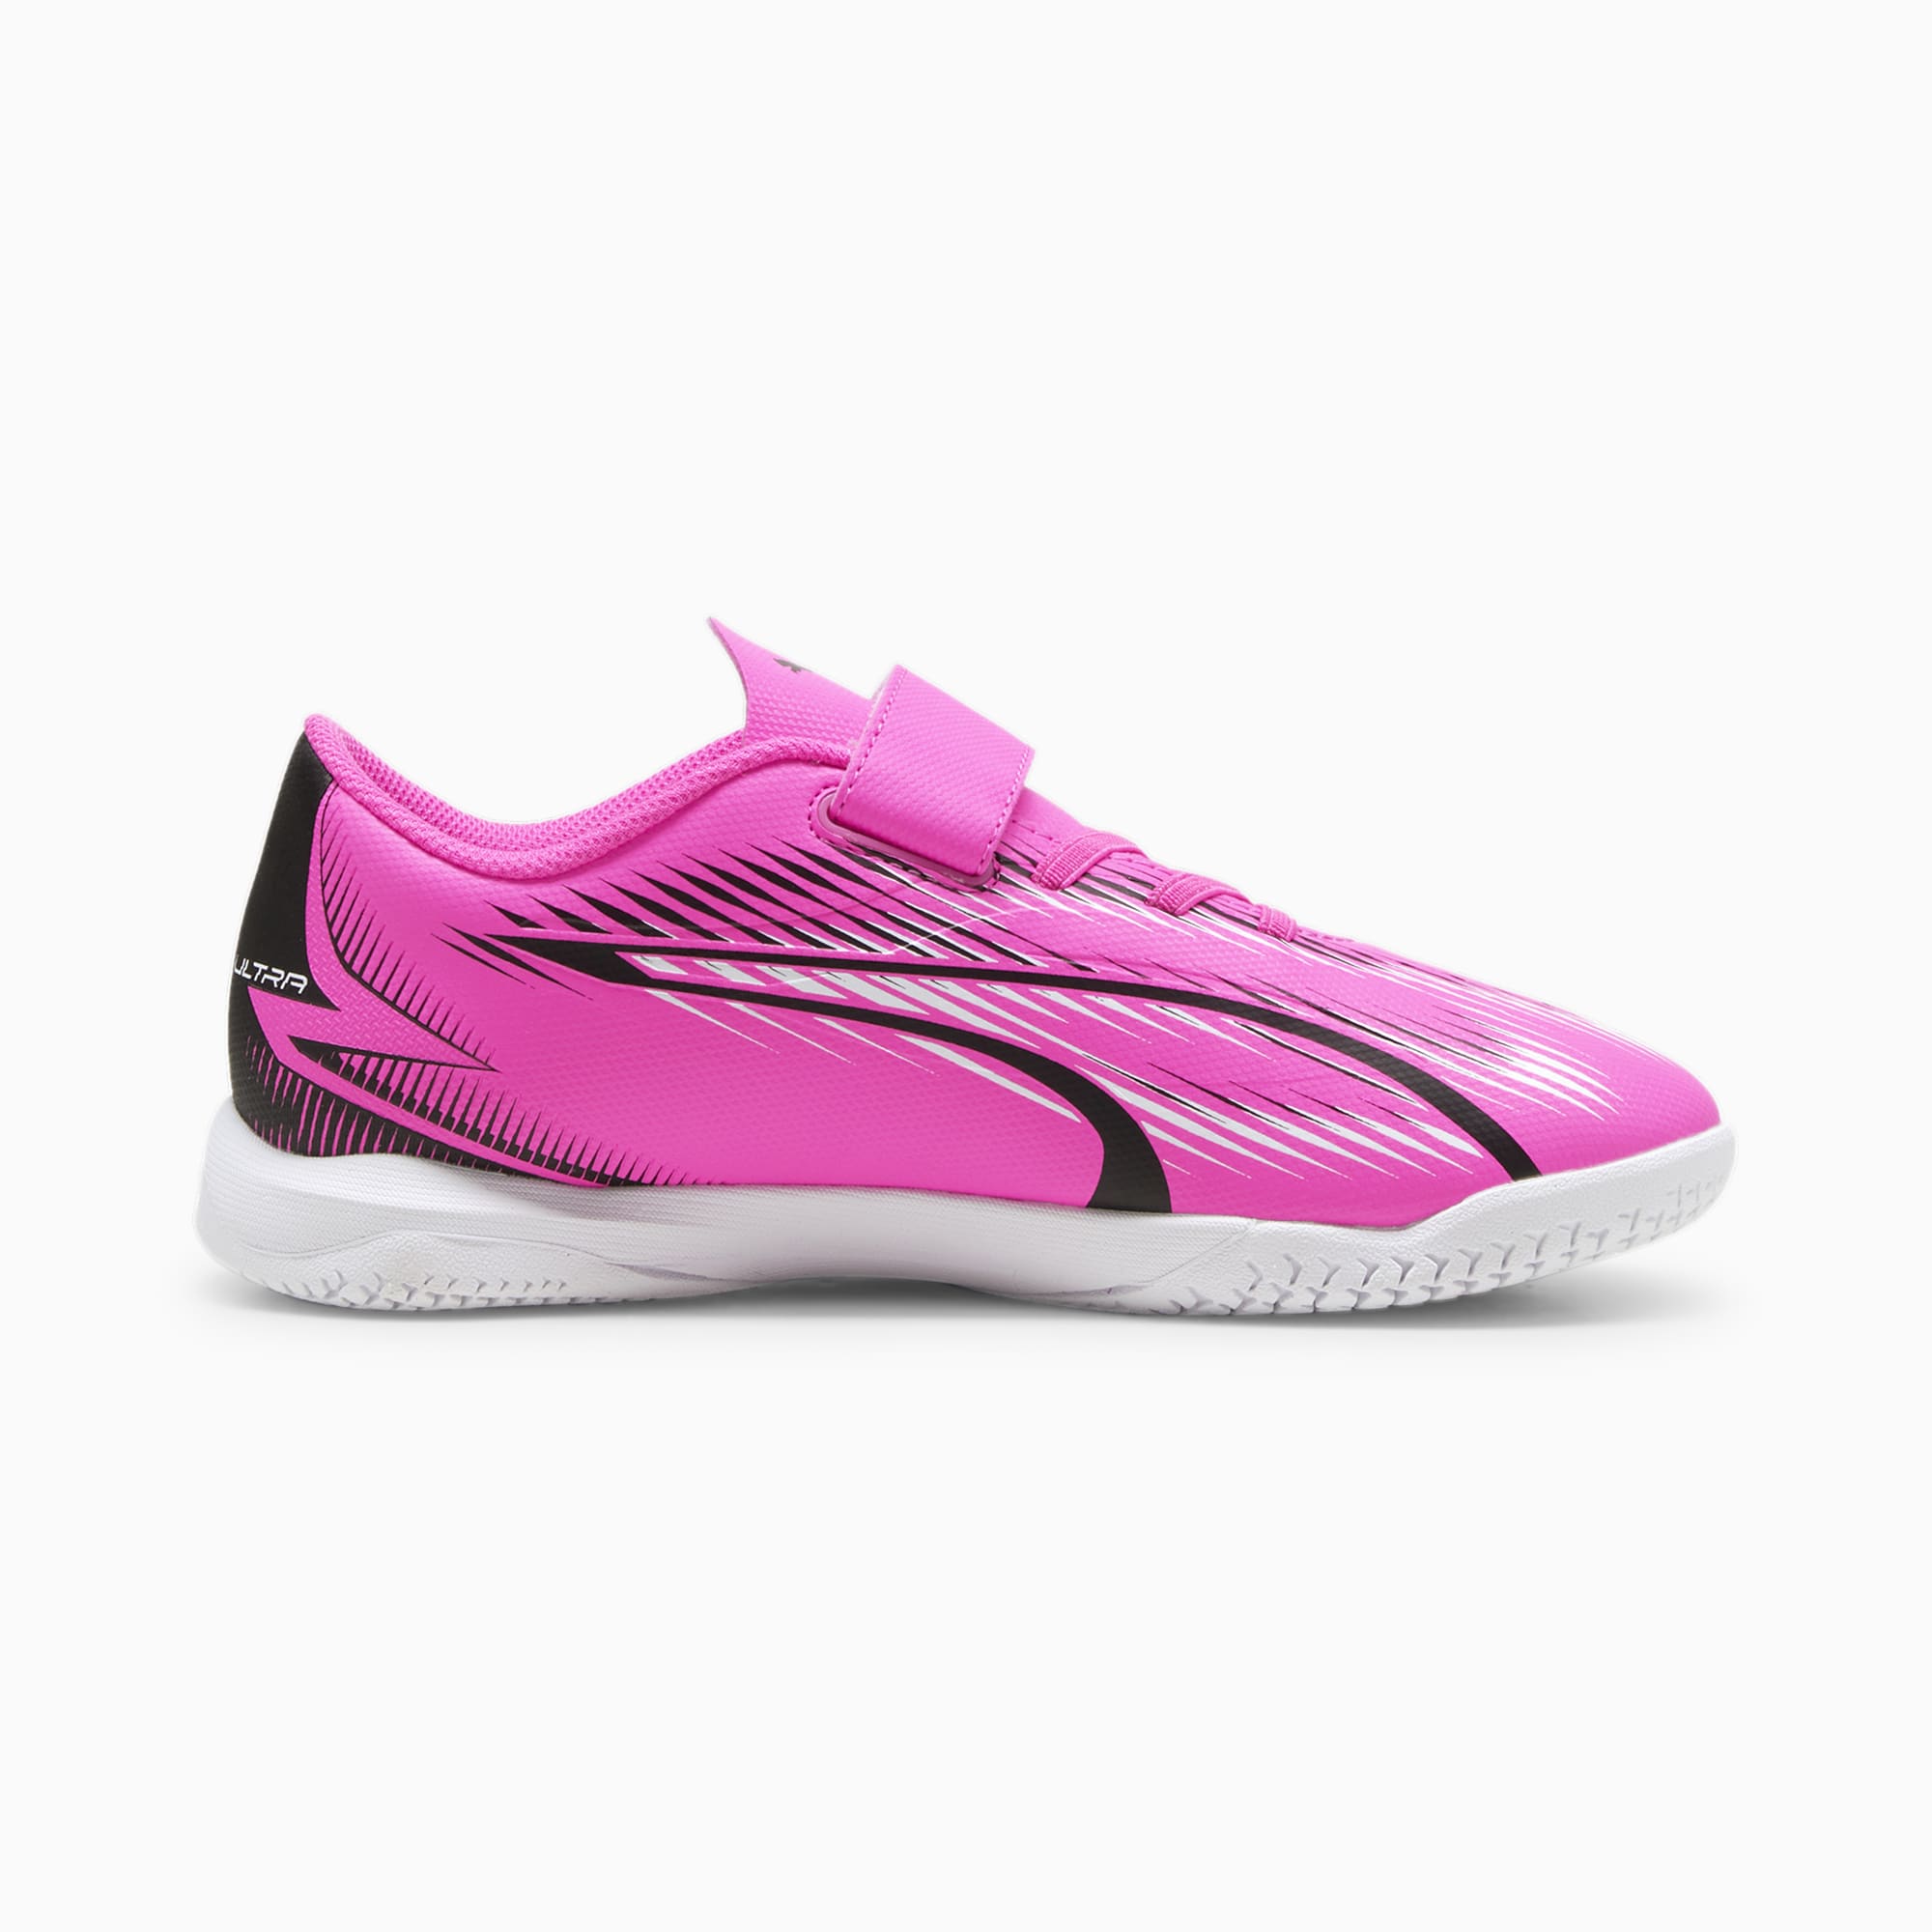 PUMA Ultra Play IT Youth Football Boots, Poison Pink/White/Black